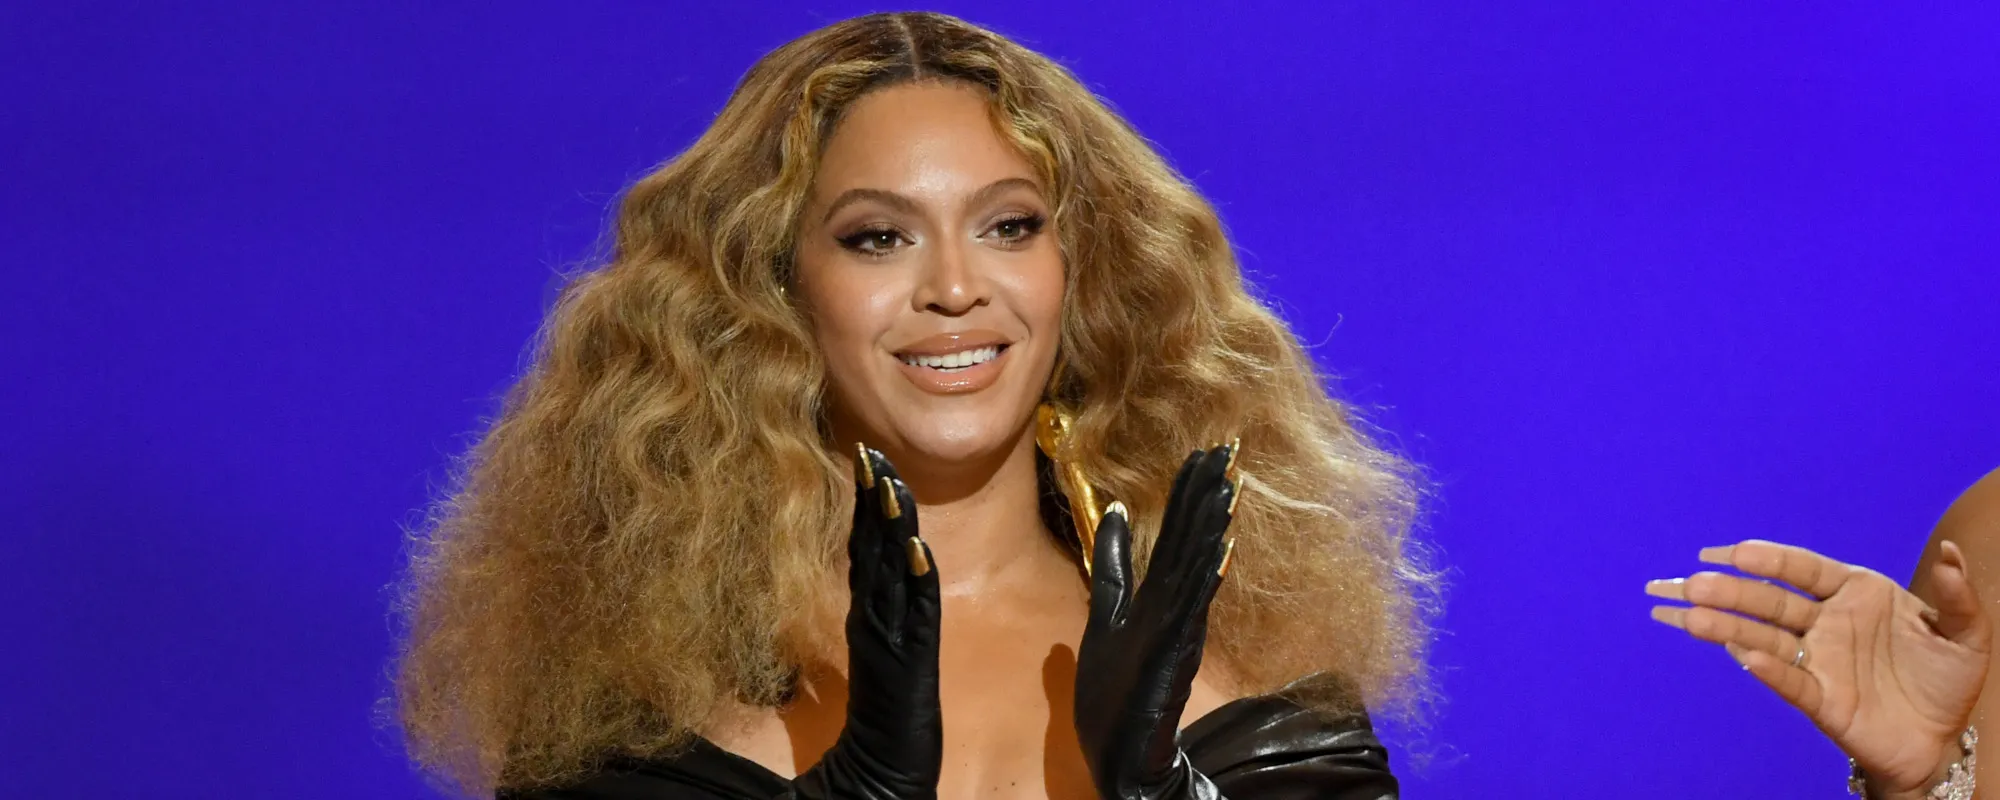 Here Are All the Lyrics Beyoncé Changed From Dolly Parton’s “Jolene”